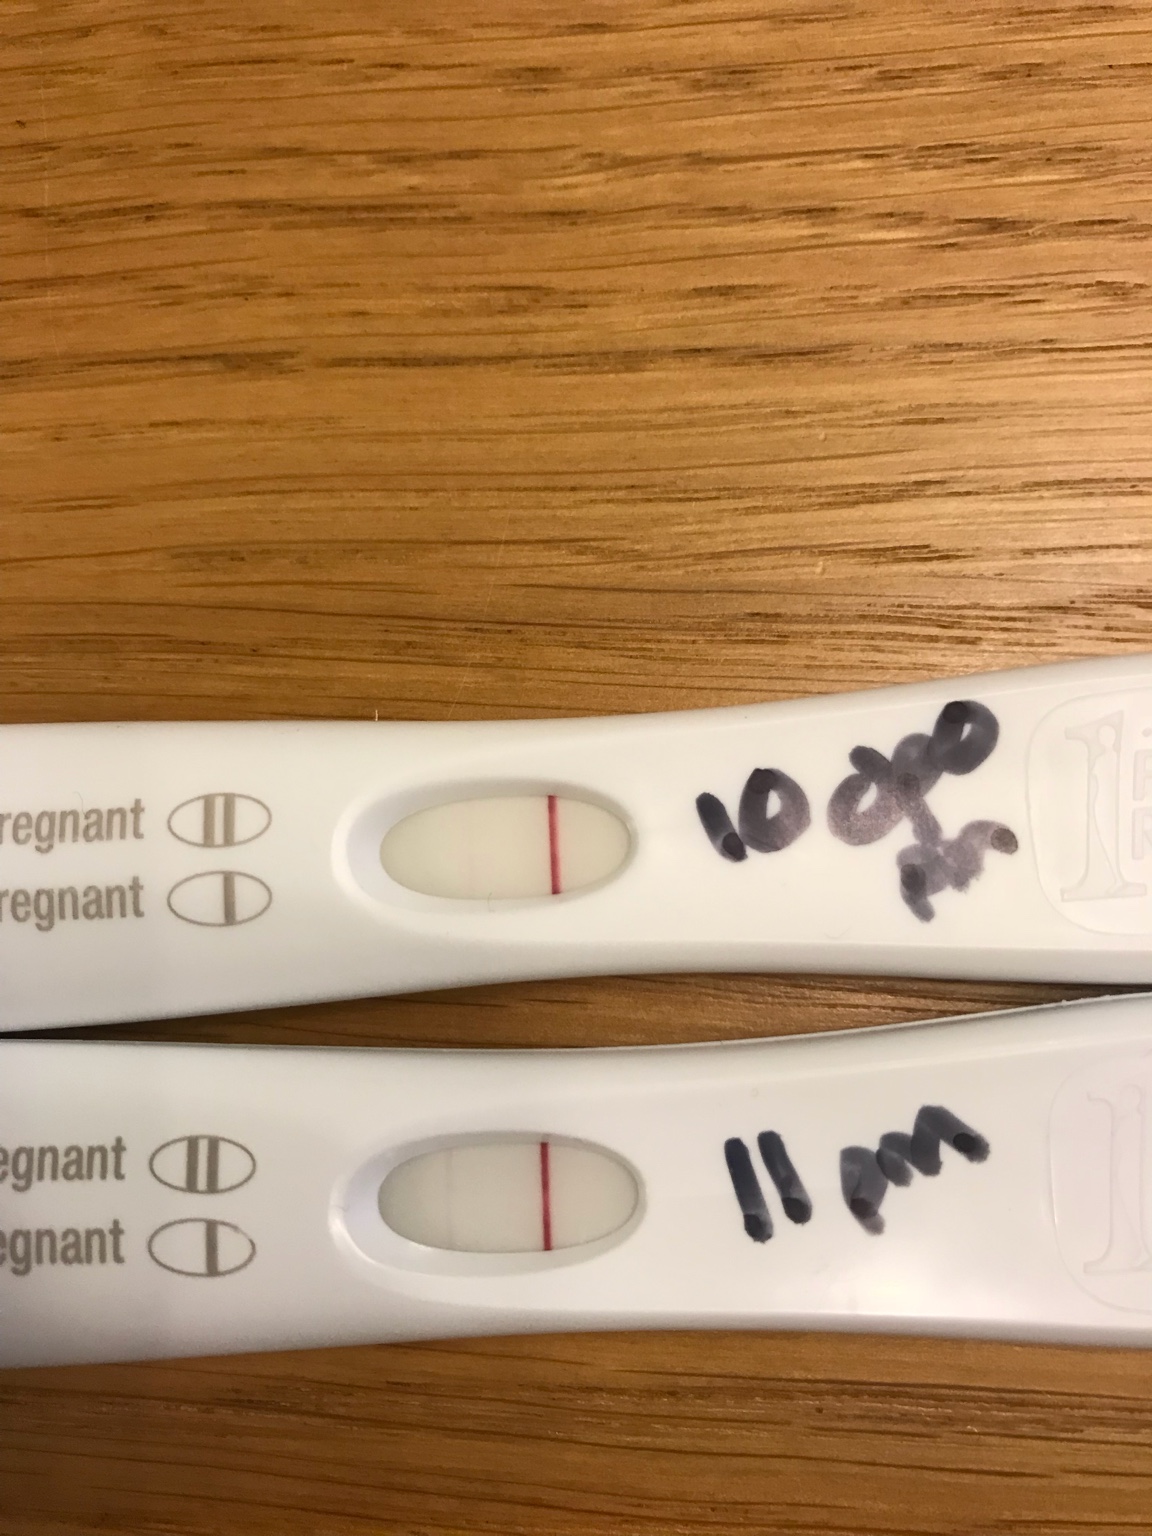 10 Dpo Is This Positive